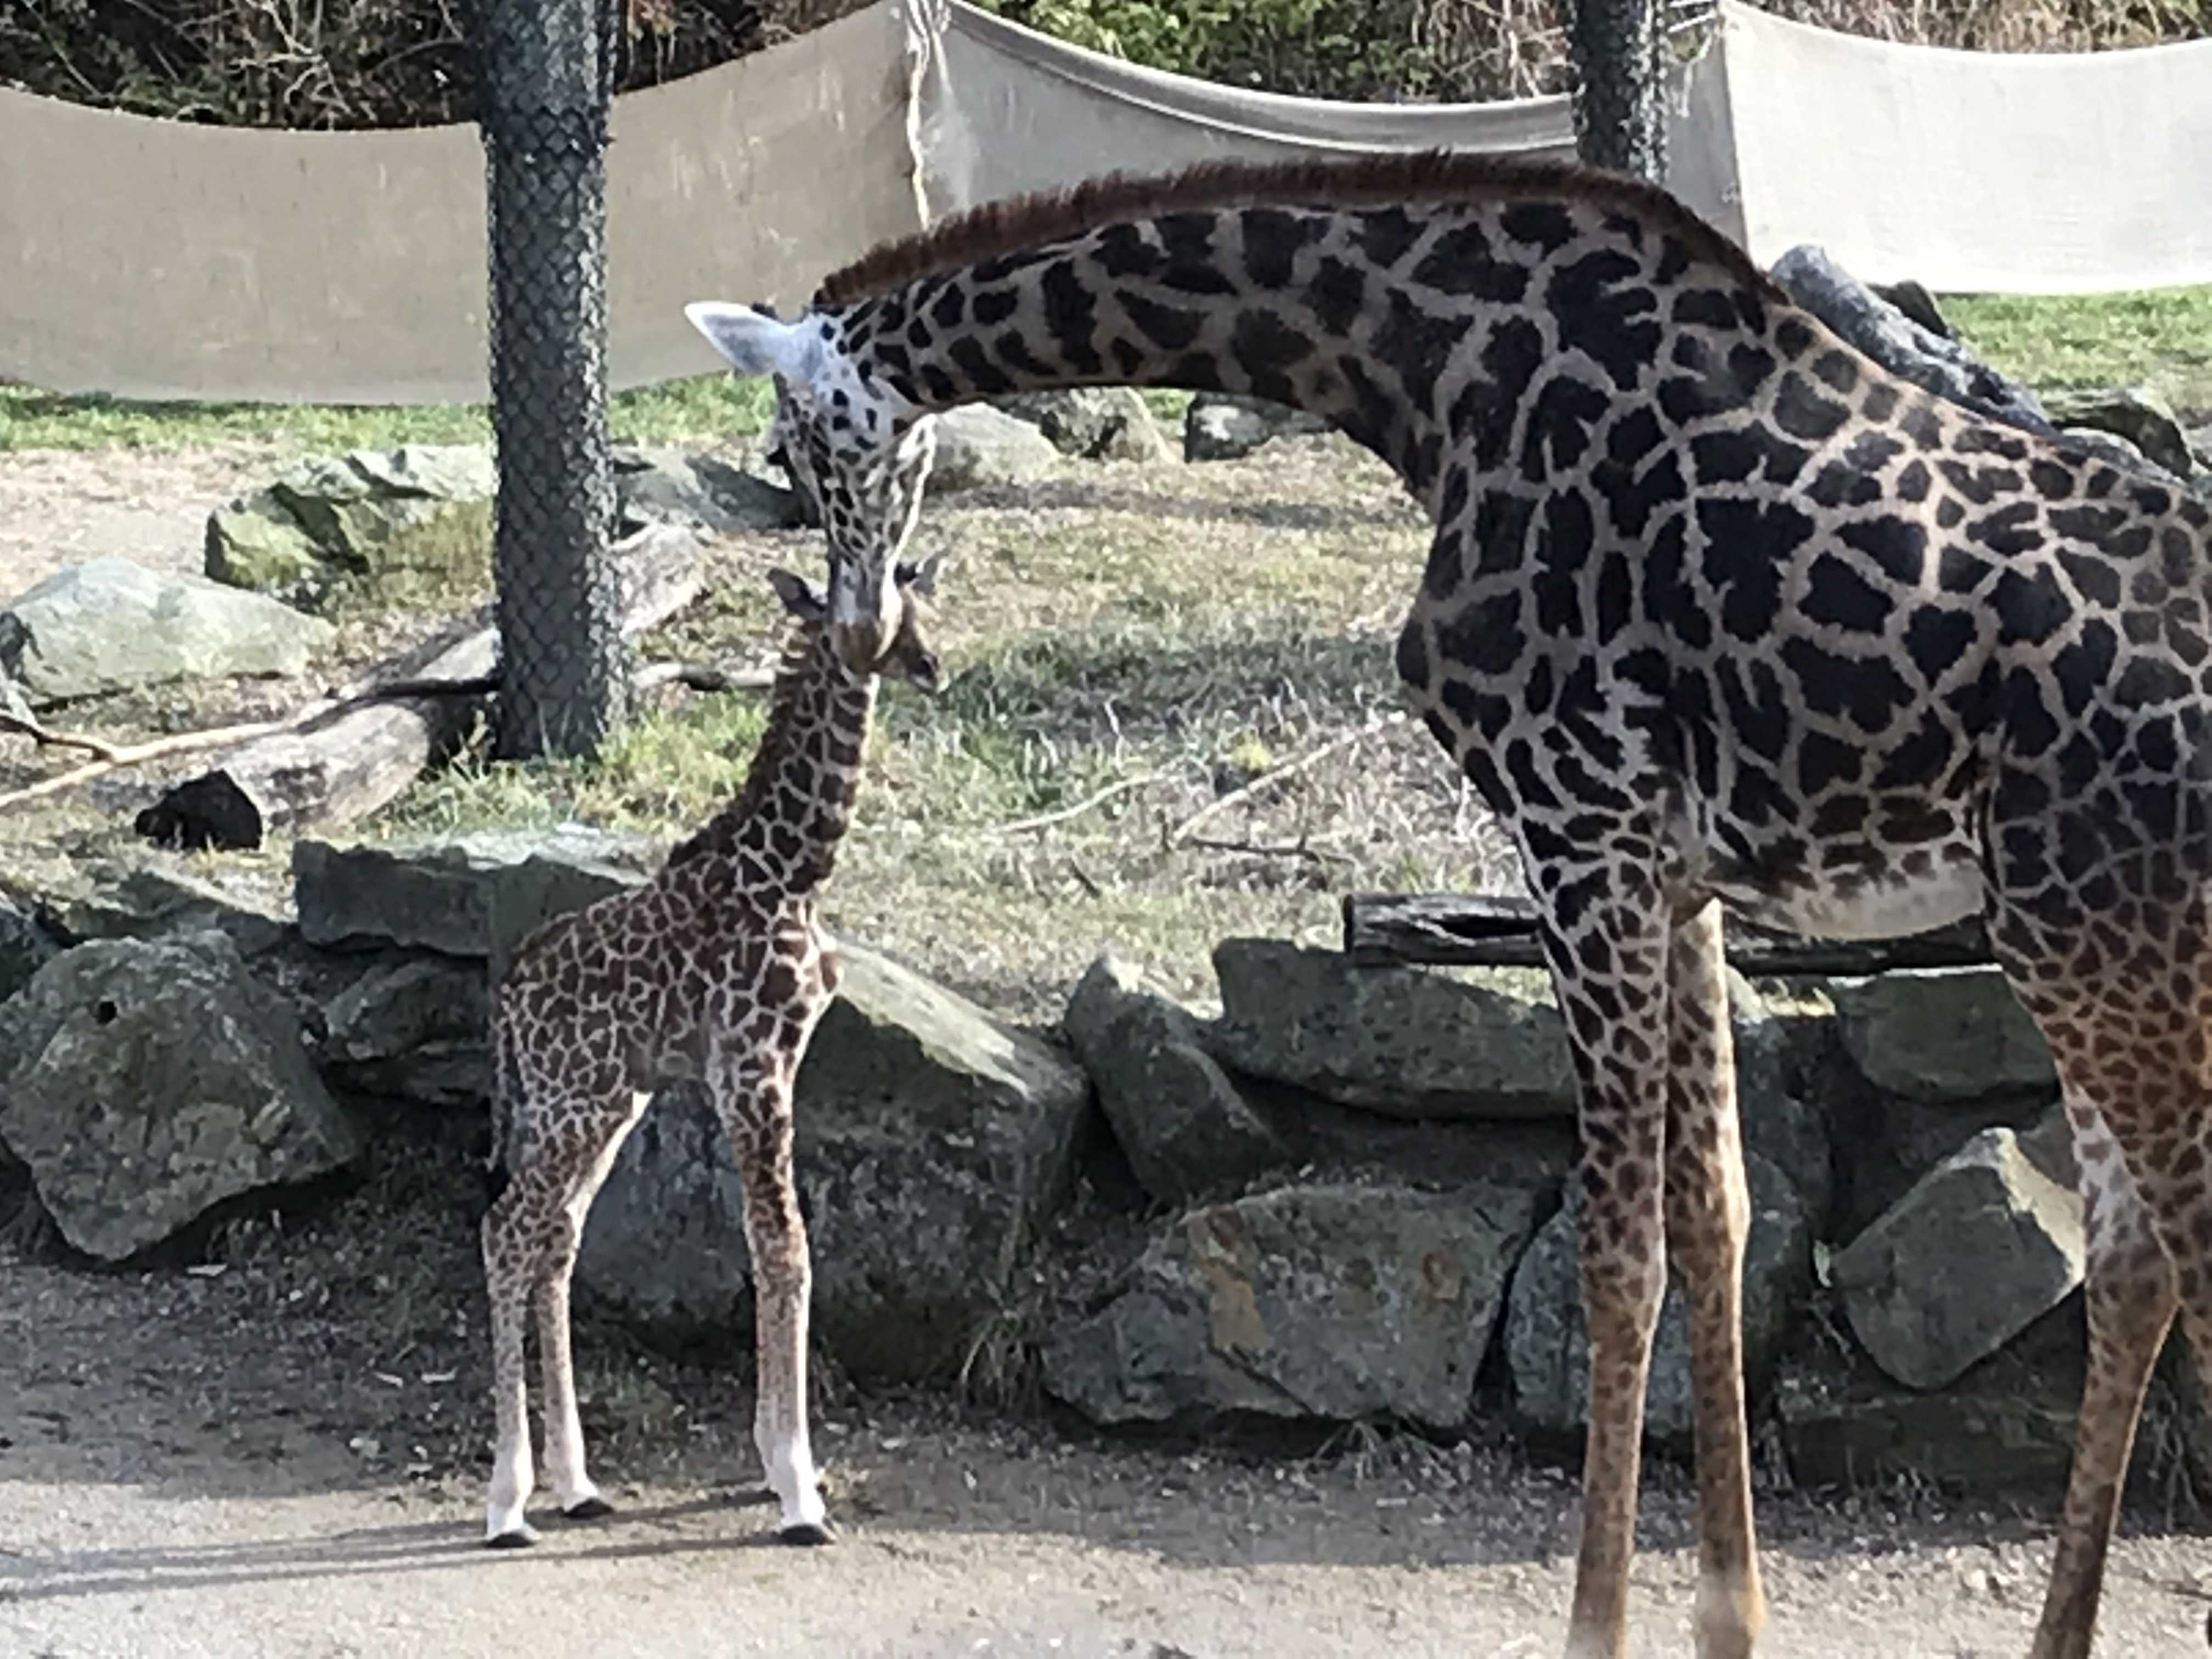 Baby giraffe introduced to giraffe friends for first time at Cincinnati Zoo